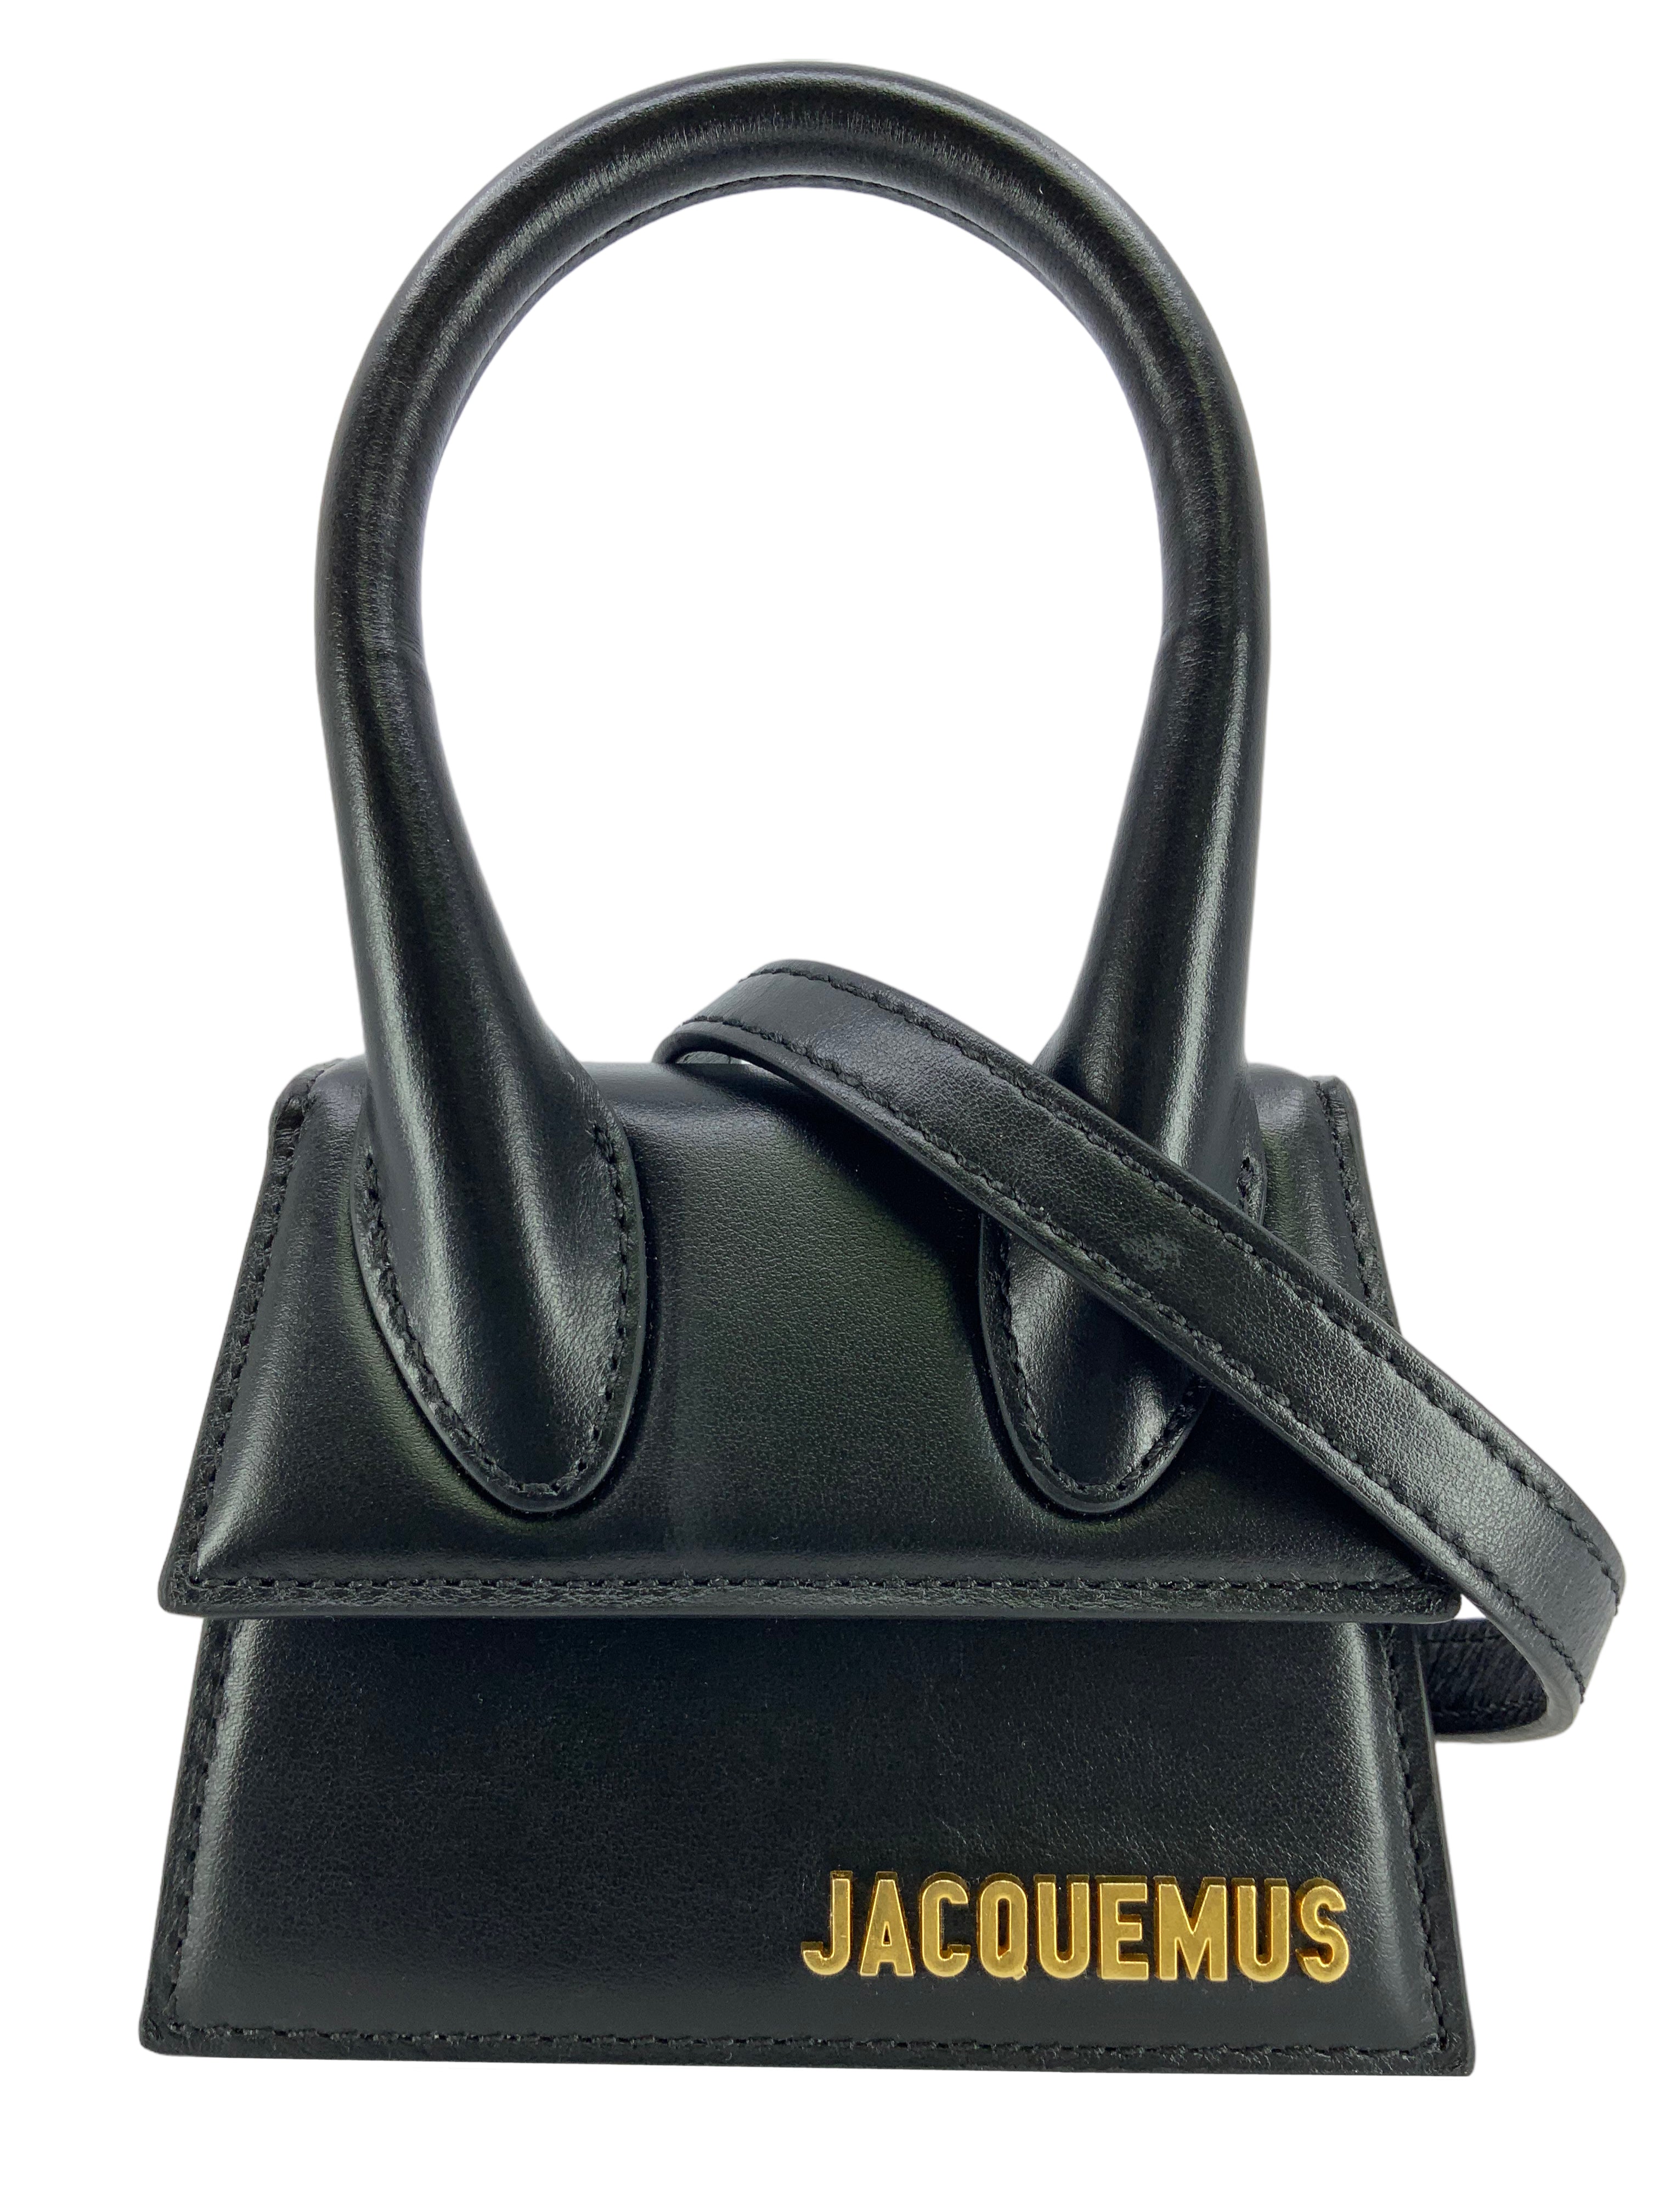 Le Chiquito Noeud Bag - Jacquemus - Pink - Leather